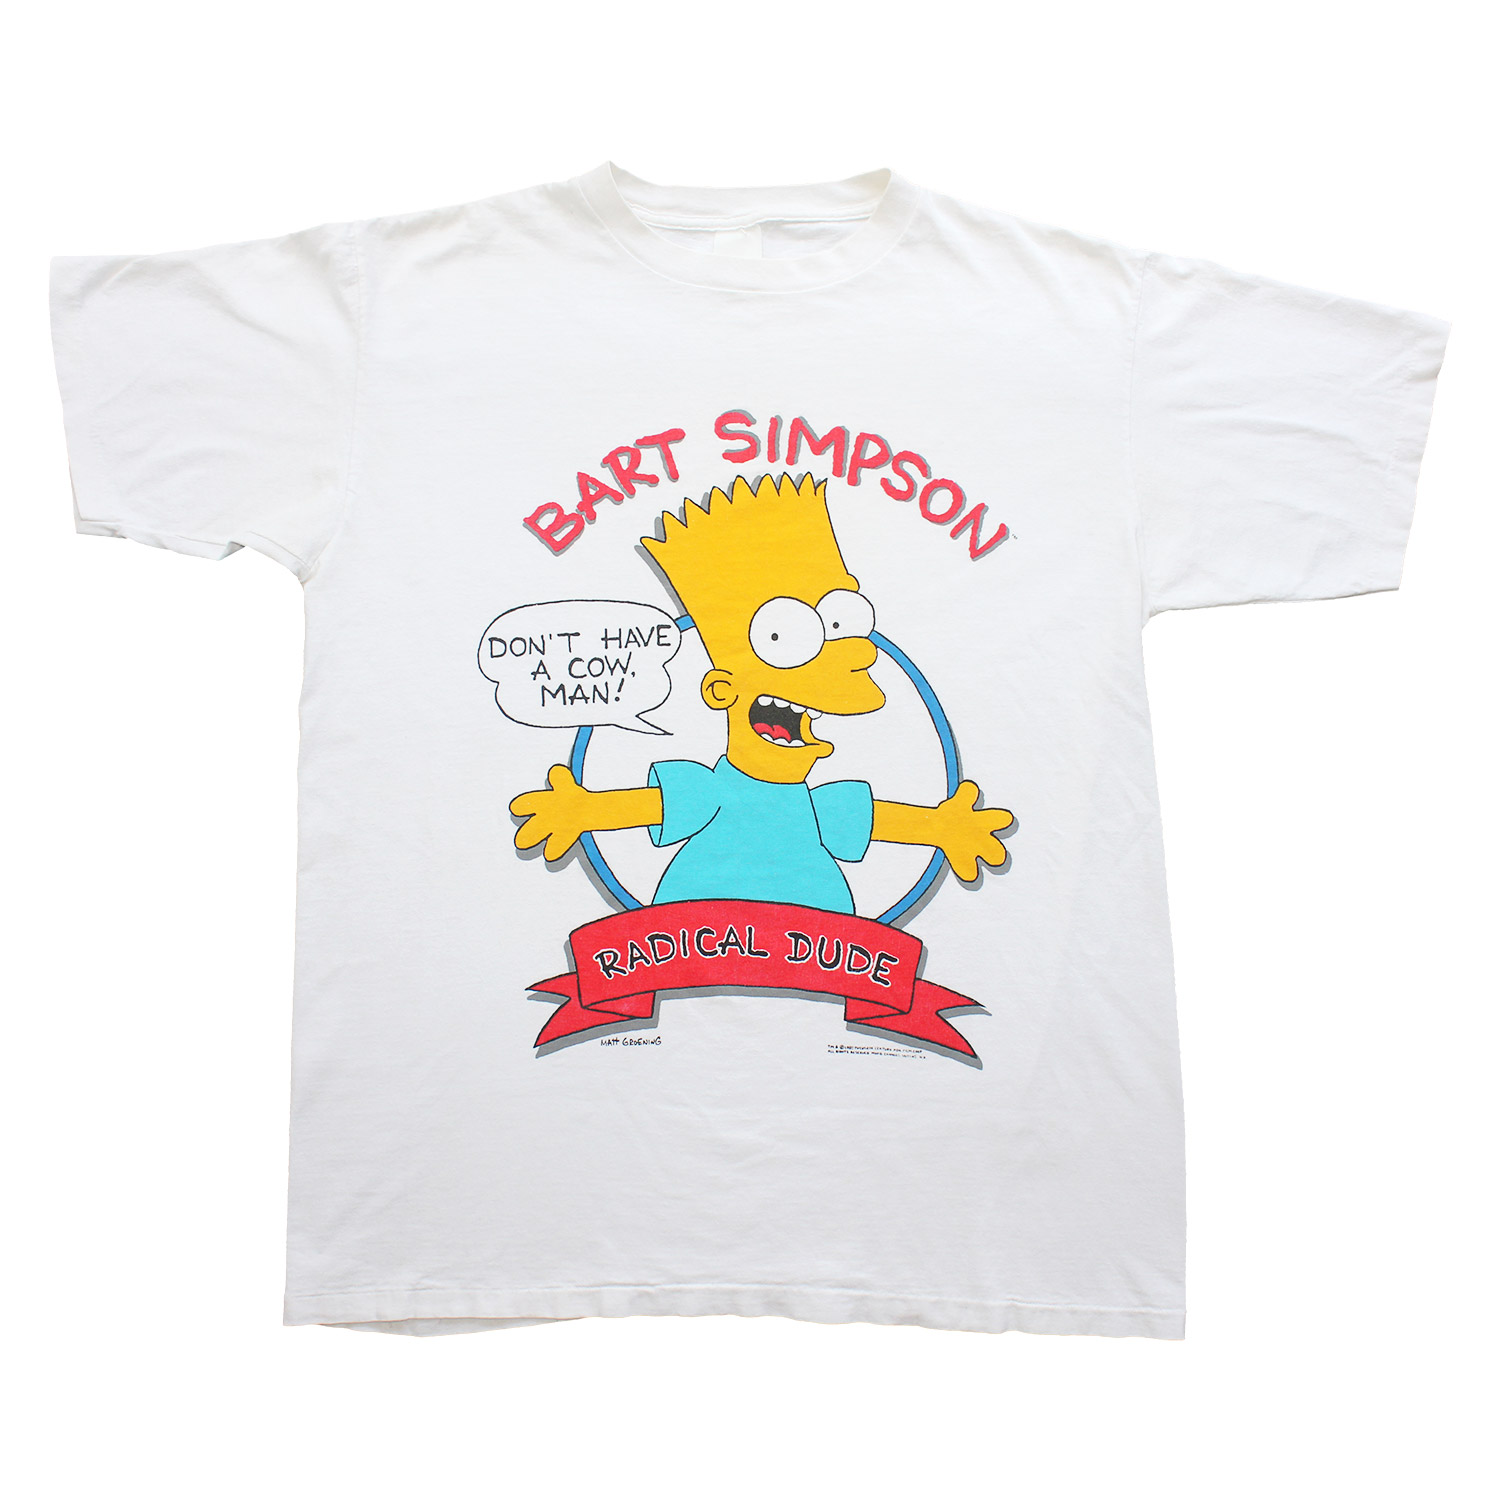 Vintage The Simpsons Bart Simpson Radical Dude T-shirt, Front